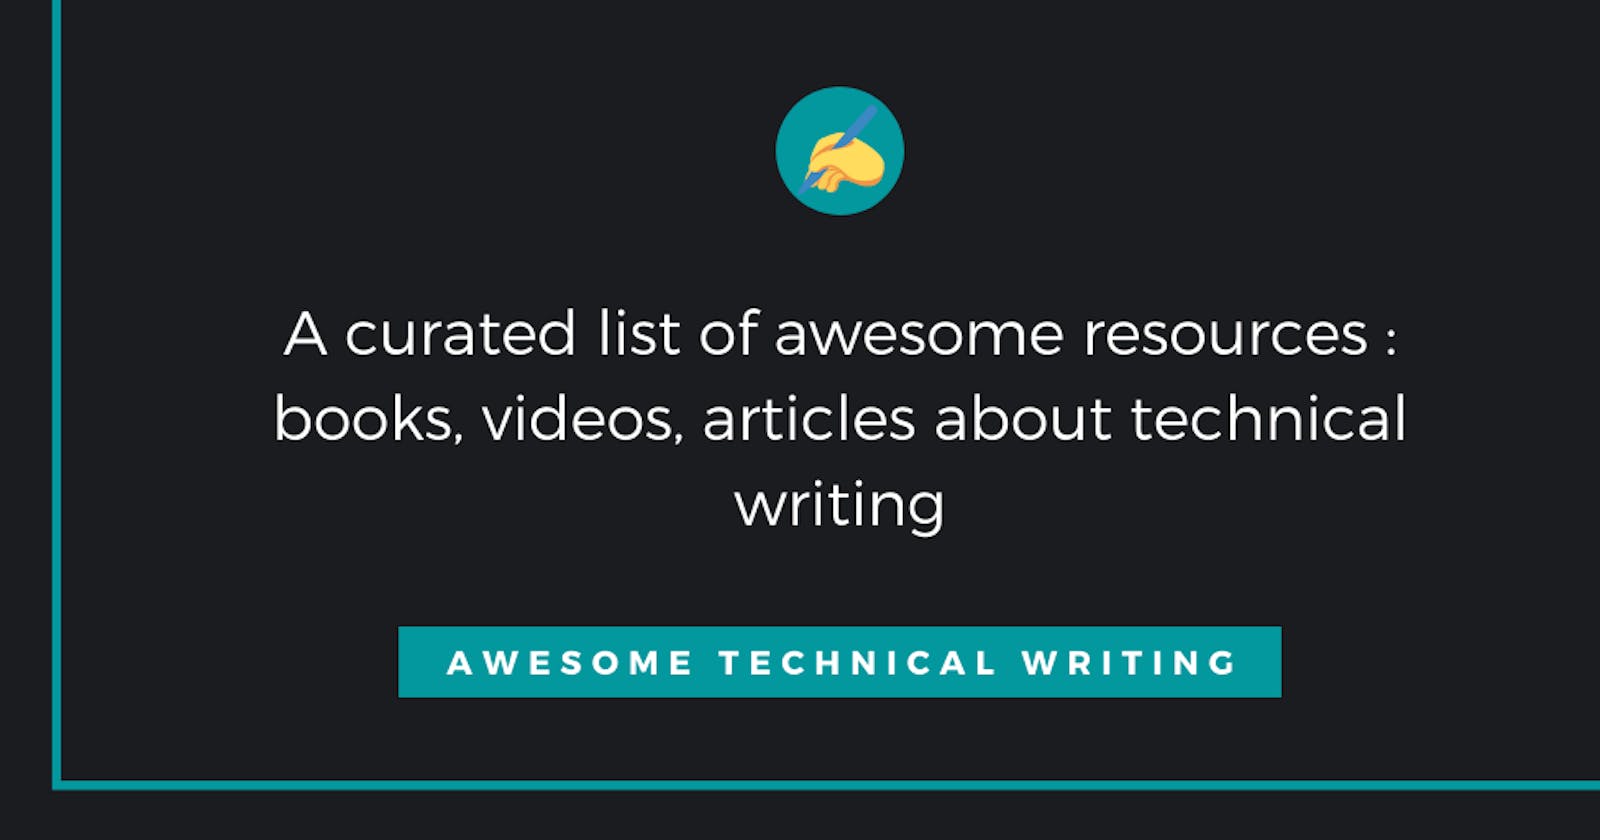 Awesome Technical Writing - A curated list of awesome resources about technical writing